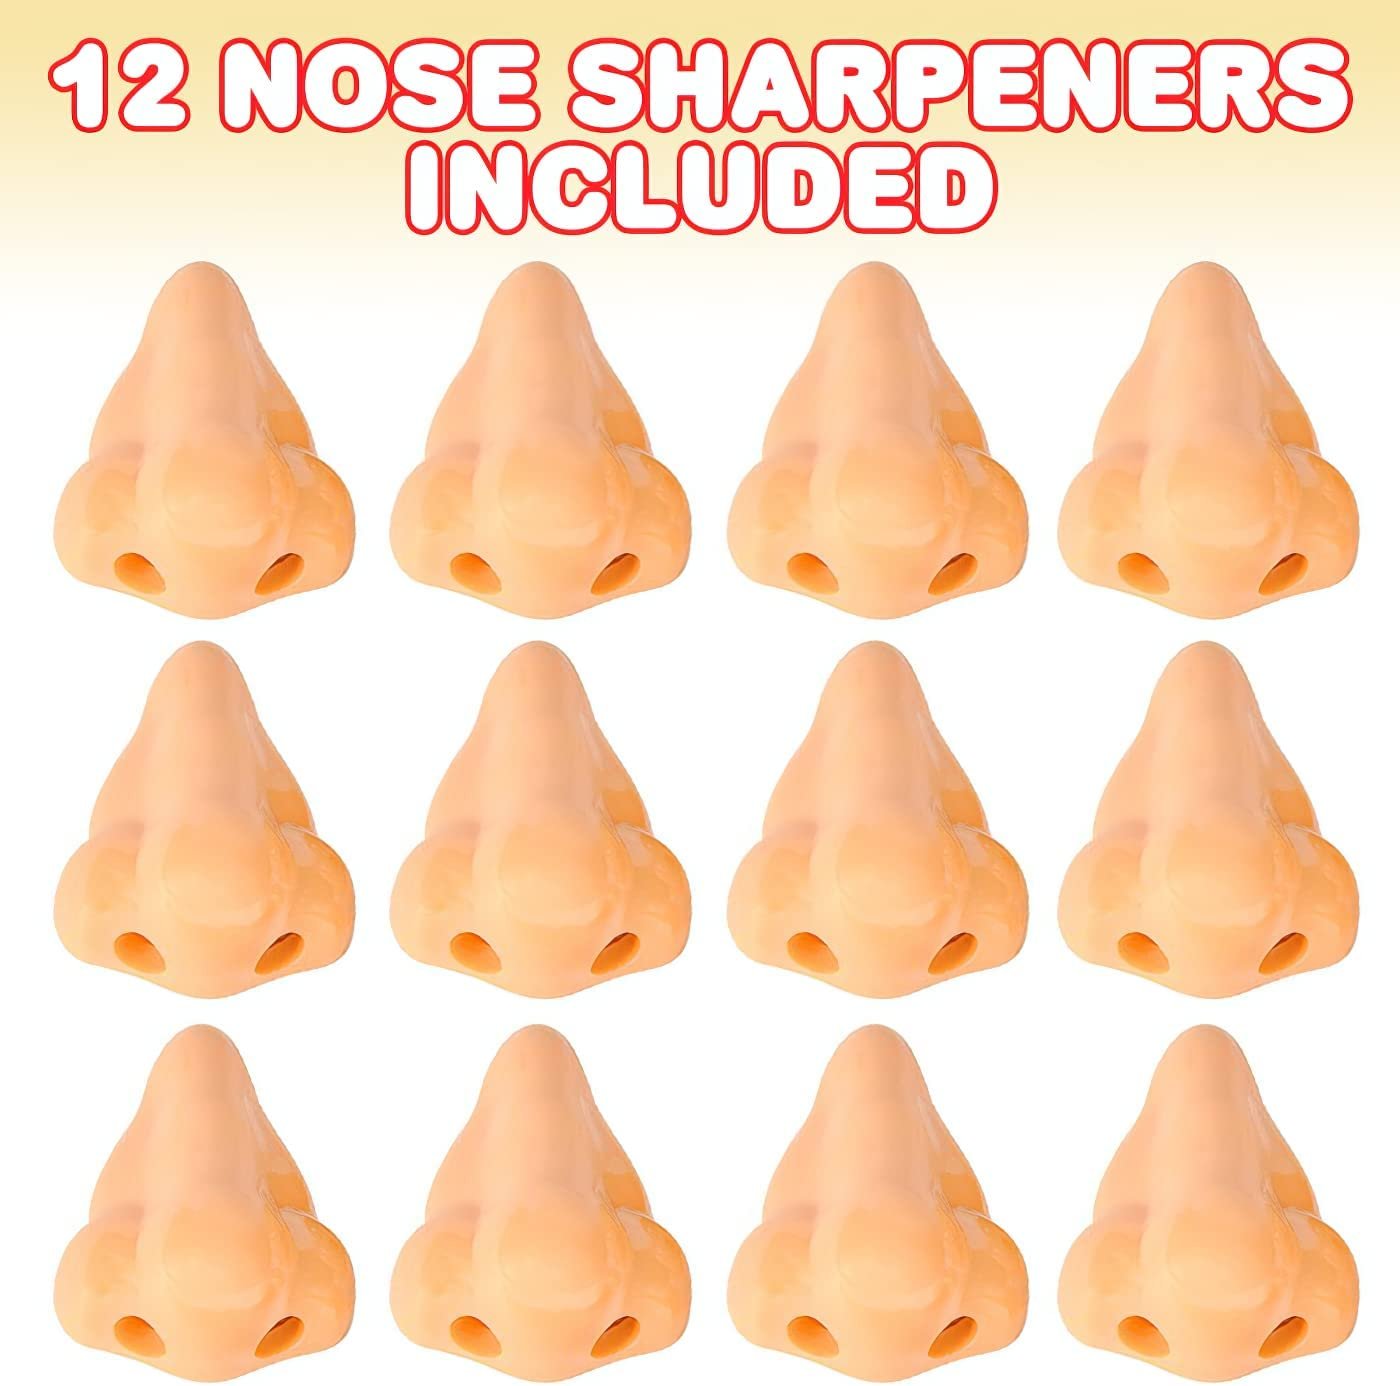 Nose Pencil Sharpeners for Kids - Pack of 12 - Funny School Supplies for Boys and Girls, Cool Stationery Birthday Party Favors for Toddlers, Classroom Teacher Rewards and Prizes